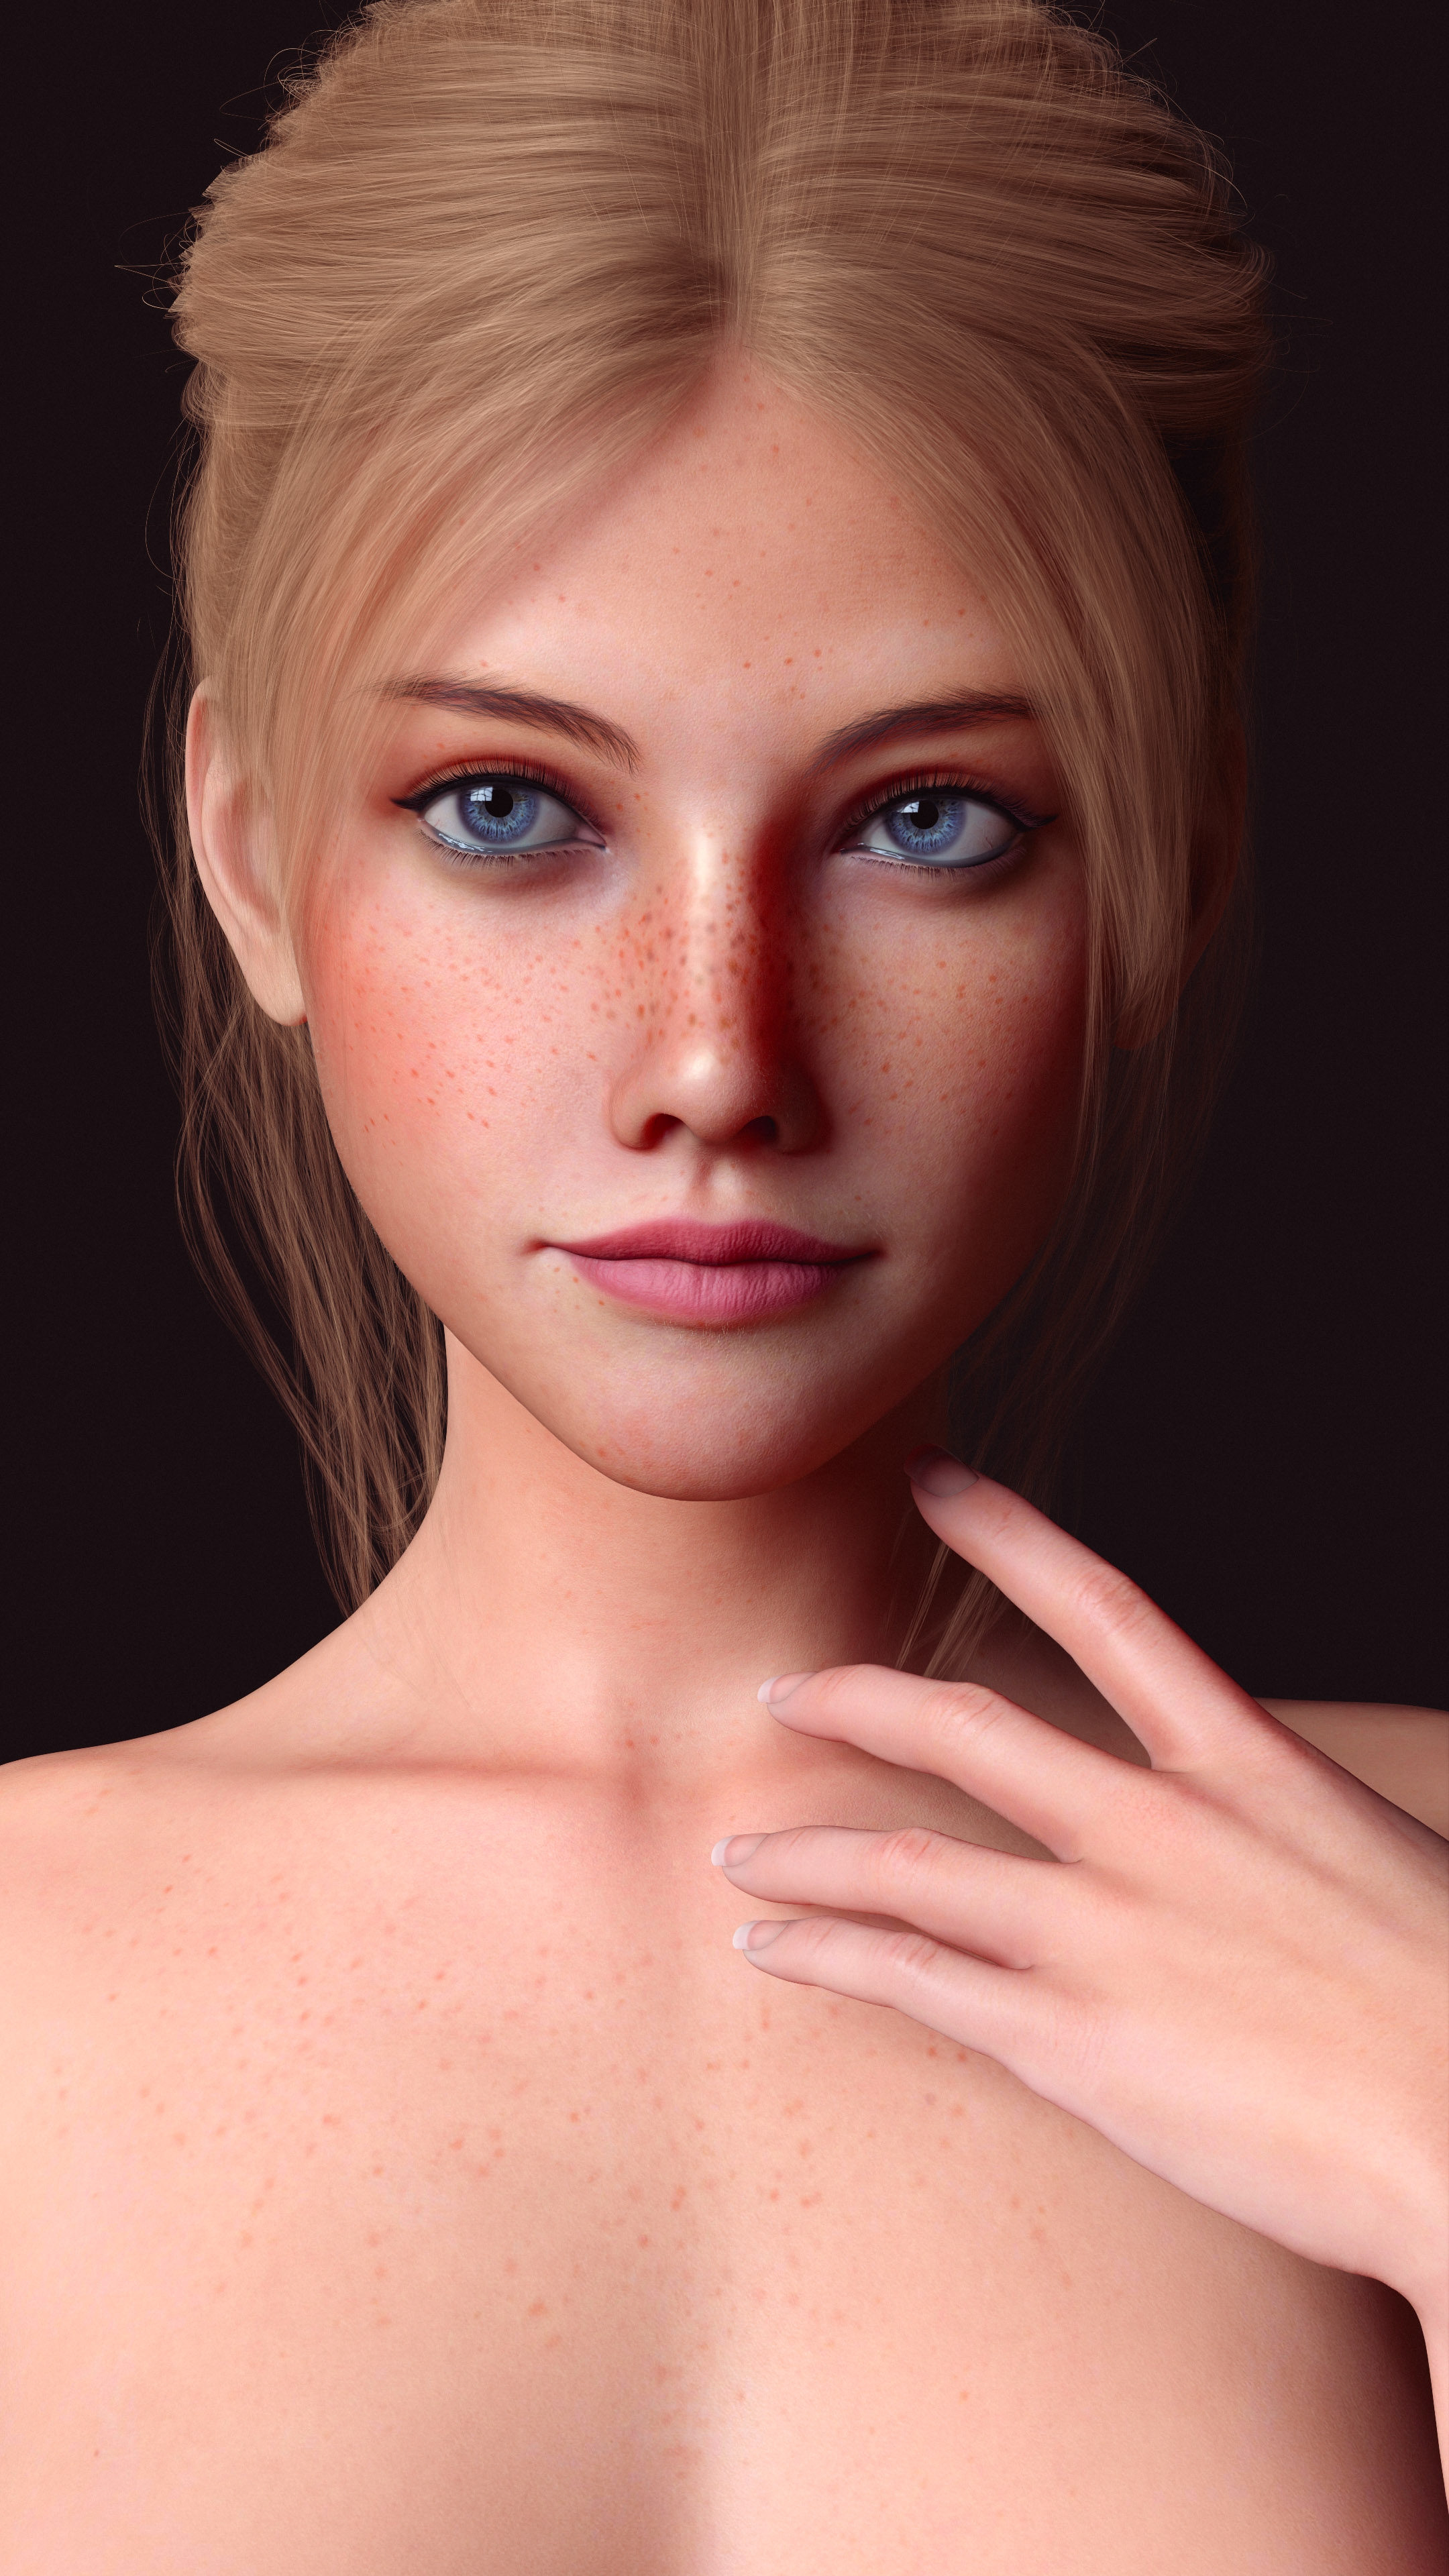 A high fidelity of skin details thanks to DAZ s Genesis 9 models and PBR textures.